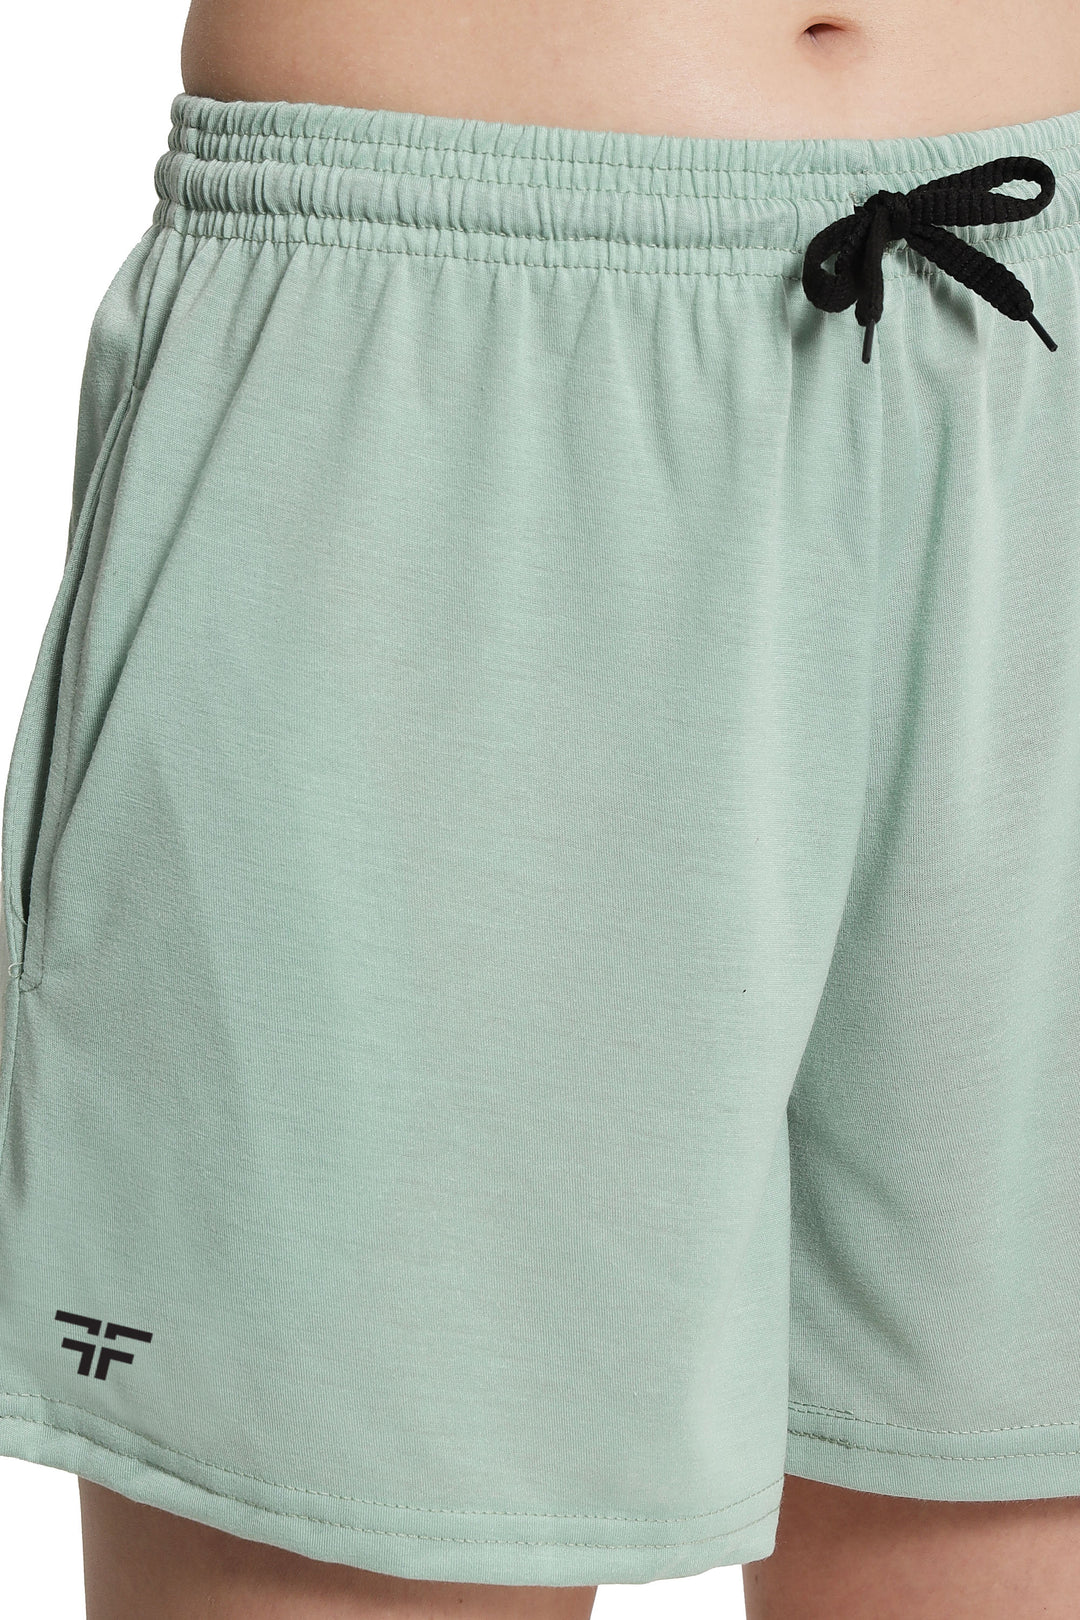 Light Green Color Solid Shorts